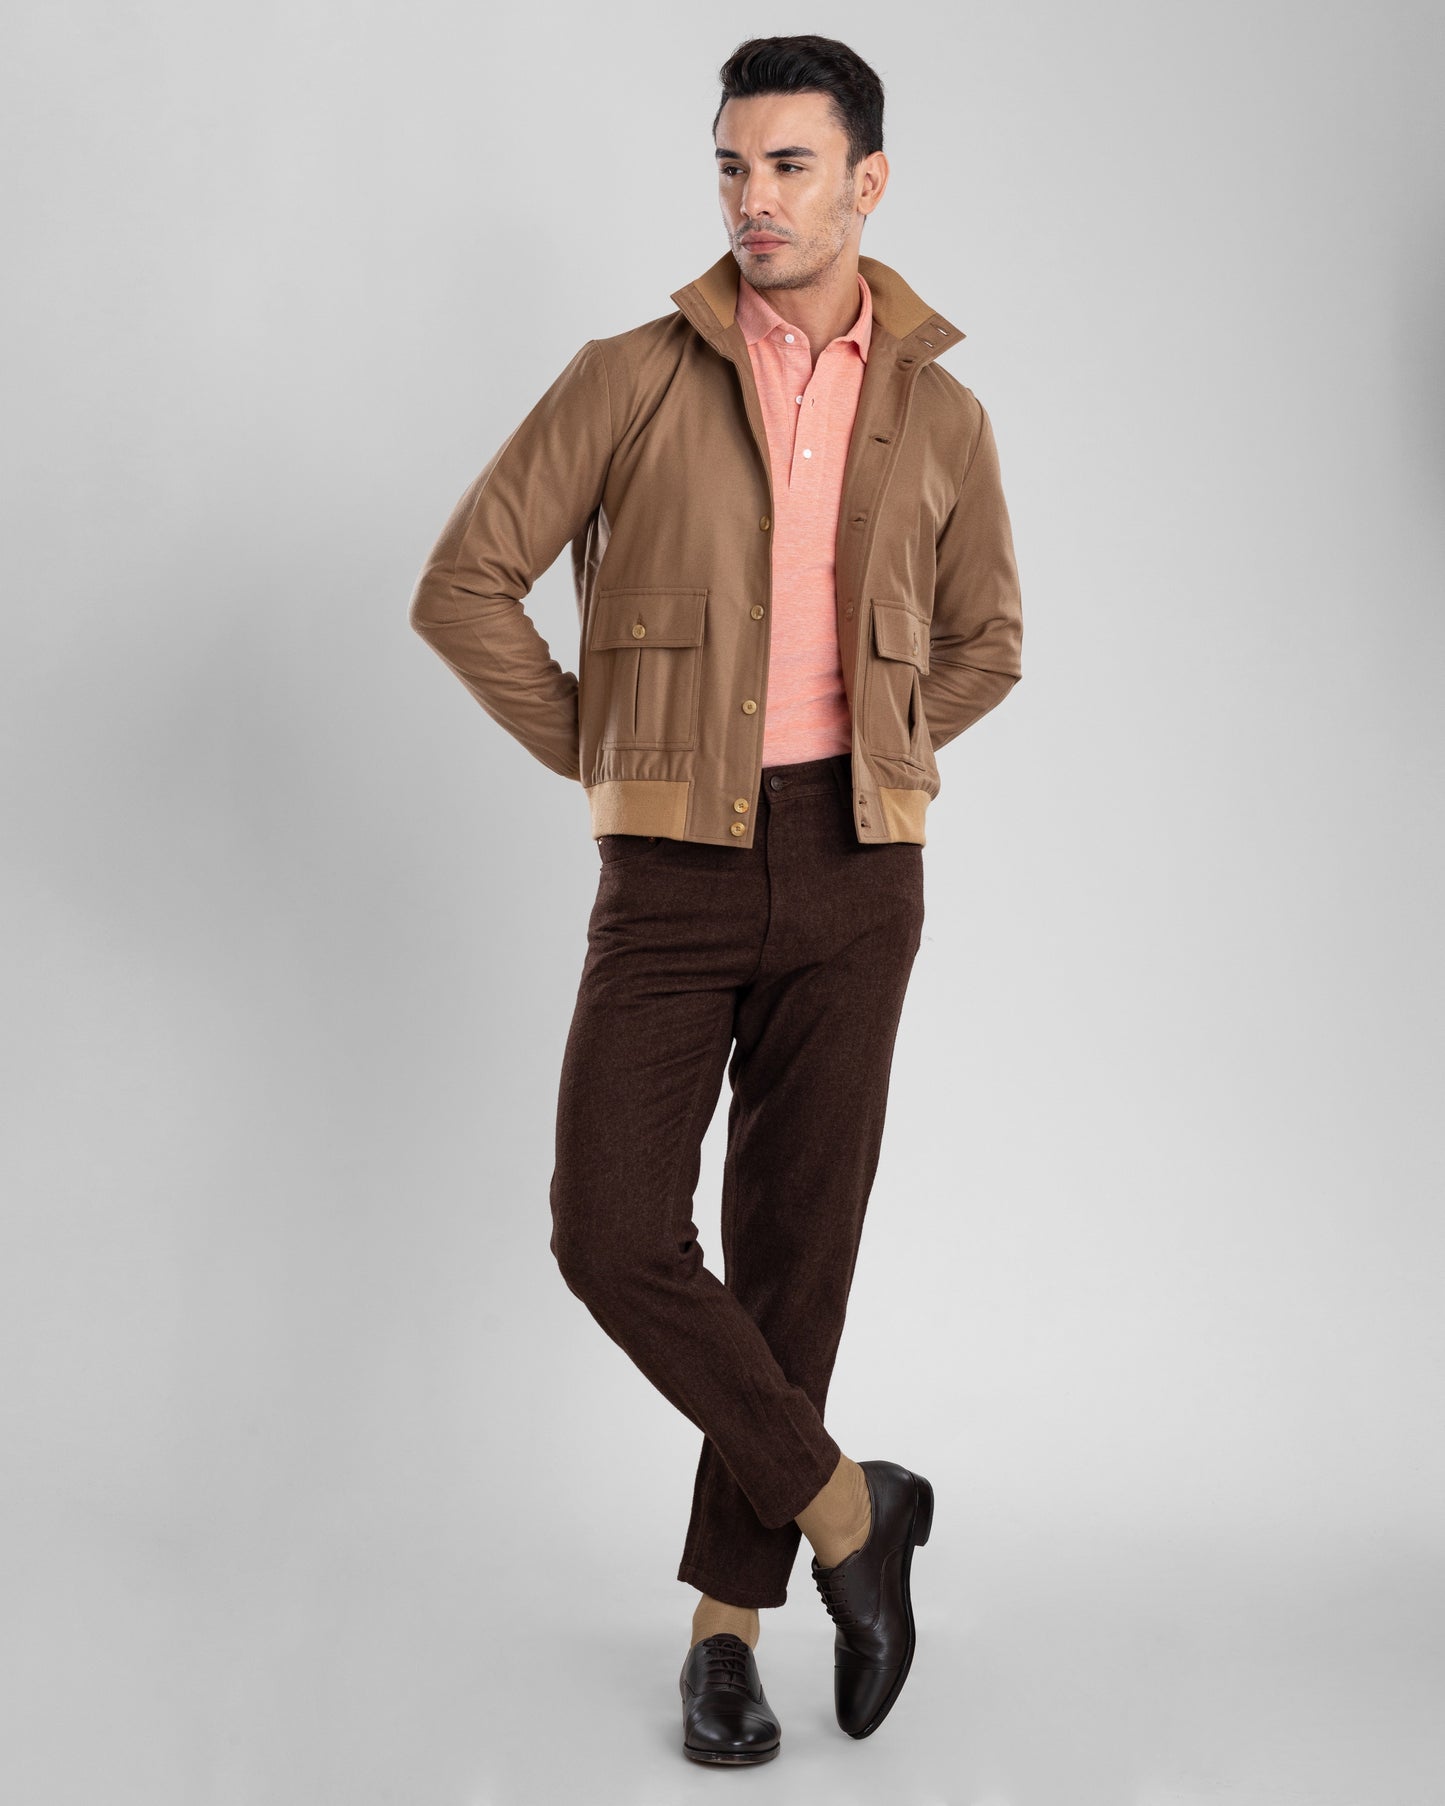 Front of model wearing the flannel shirt jacket for men by Luxire in sand with rib collar